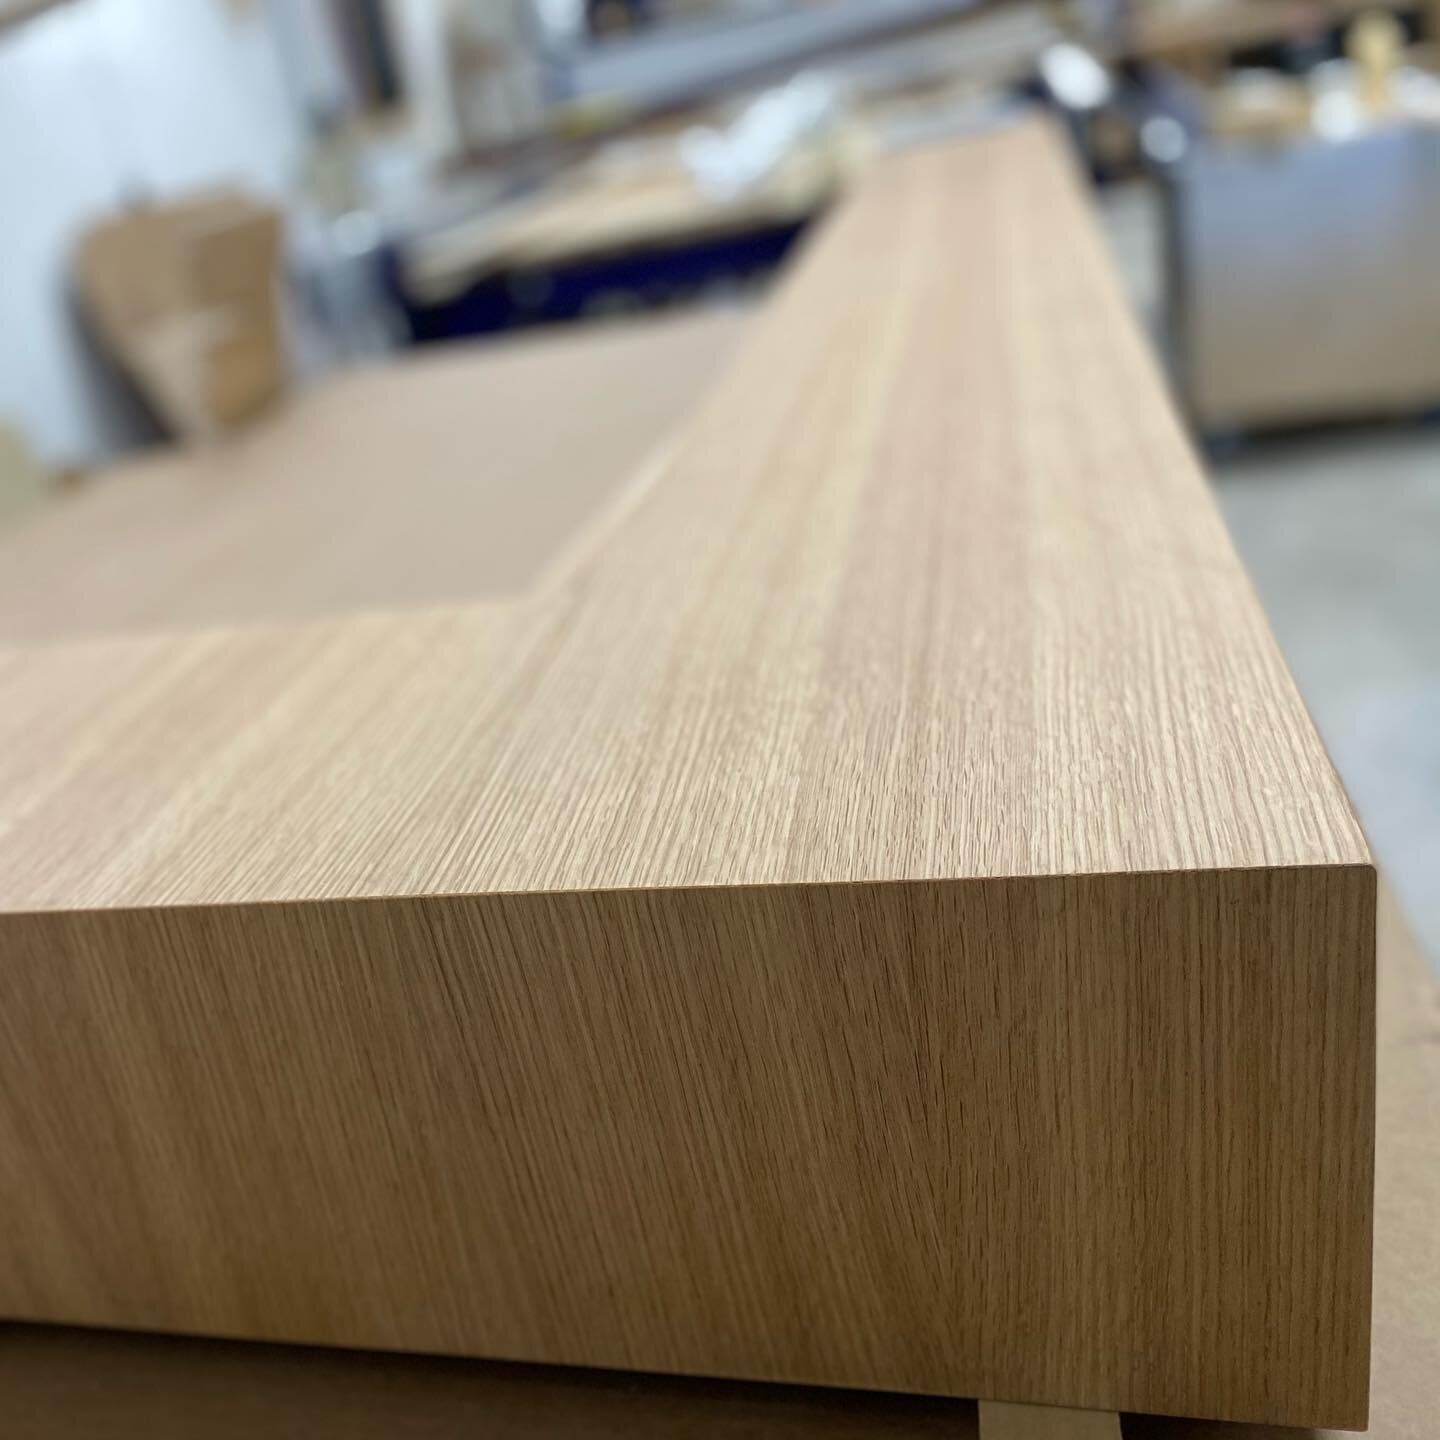 The cnc stood back and watched the ole&rsquo; Grizzly table saw do its thing with this asymmetrical reverse mantle.  3/4&rdquo; quartersawn white oak plywood mitered on all exposed edges. #quartersawnwhiteoak #asymmetricalmantle #reversemantle #grizz